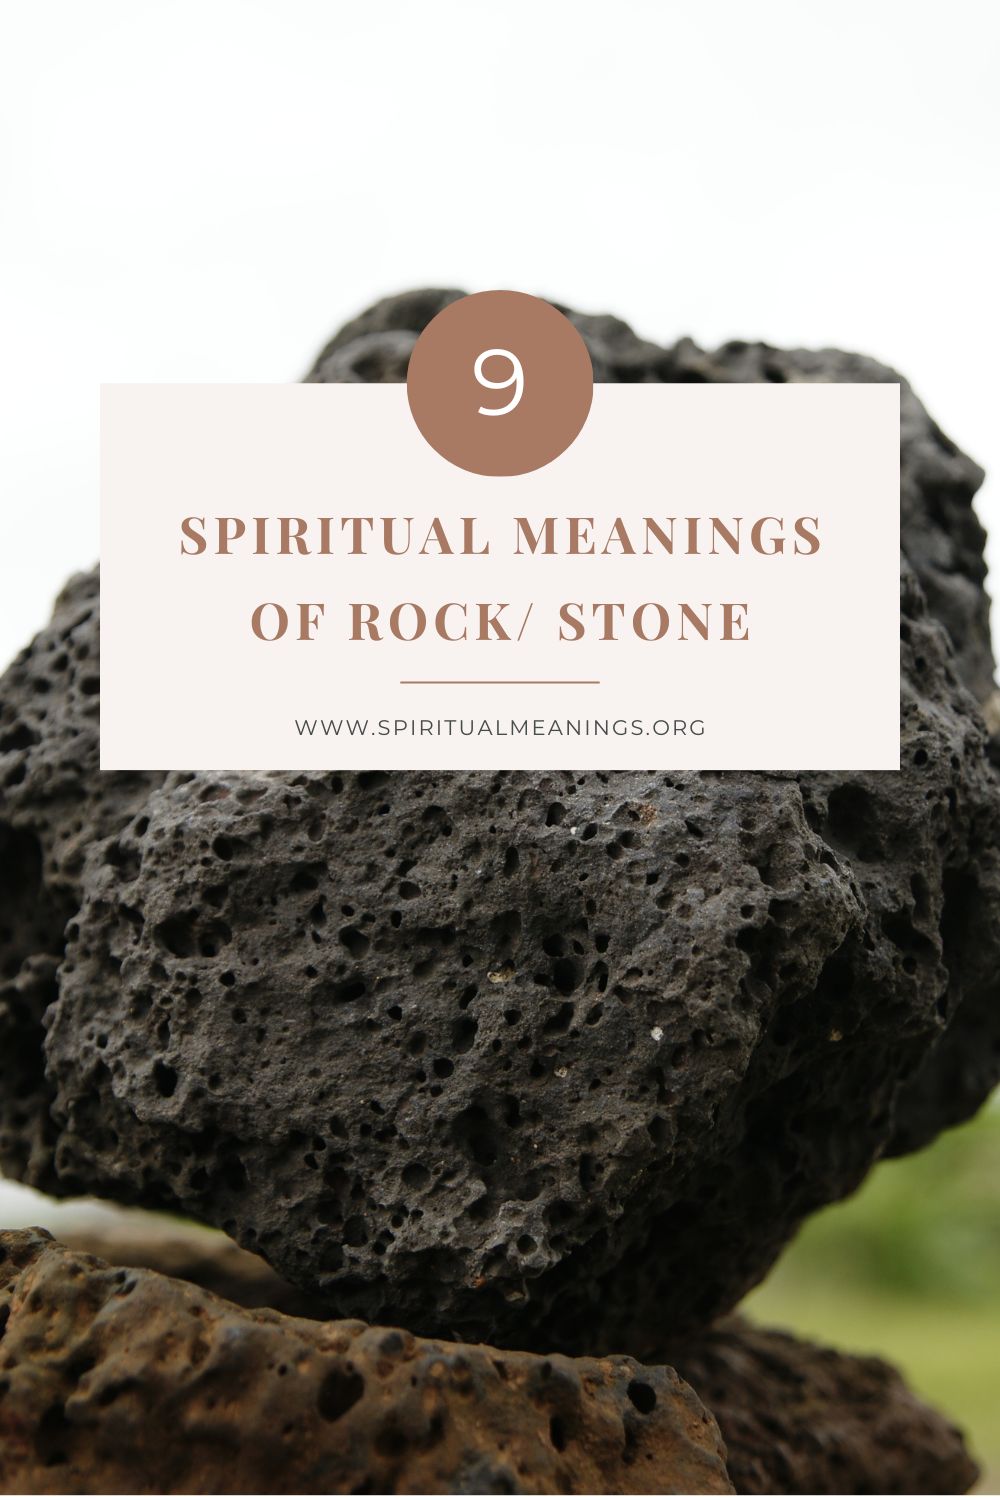 Spiritual Meanings of Rock/ Stone